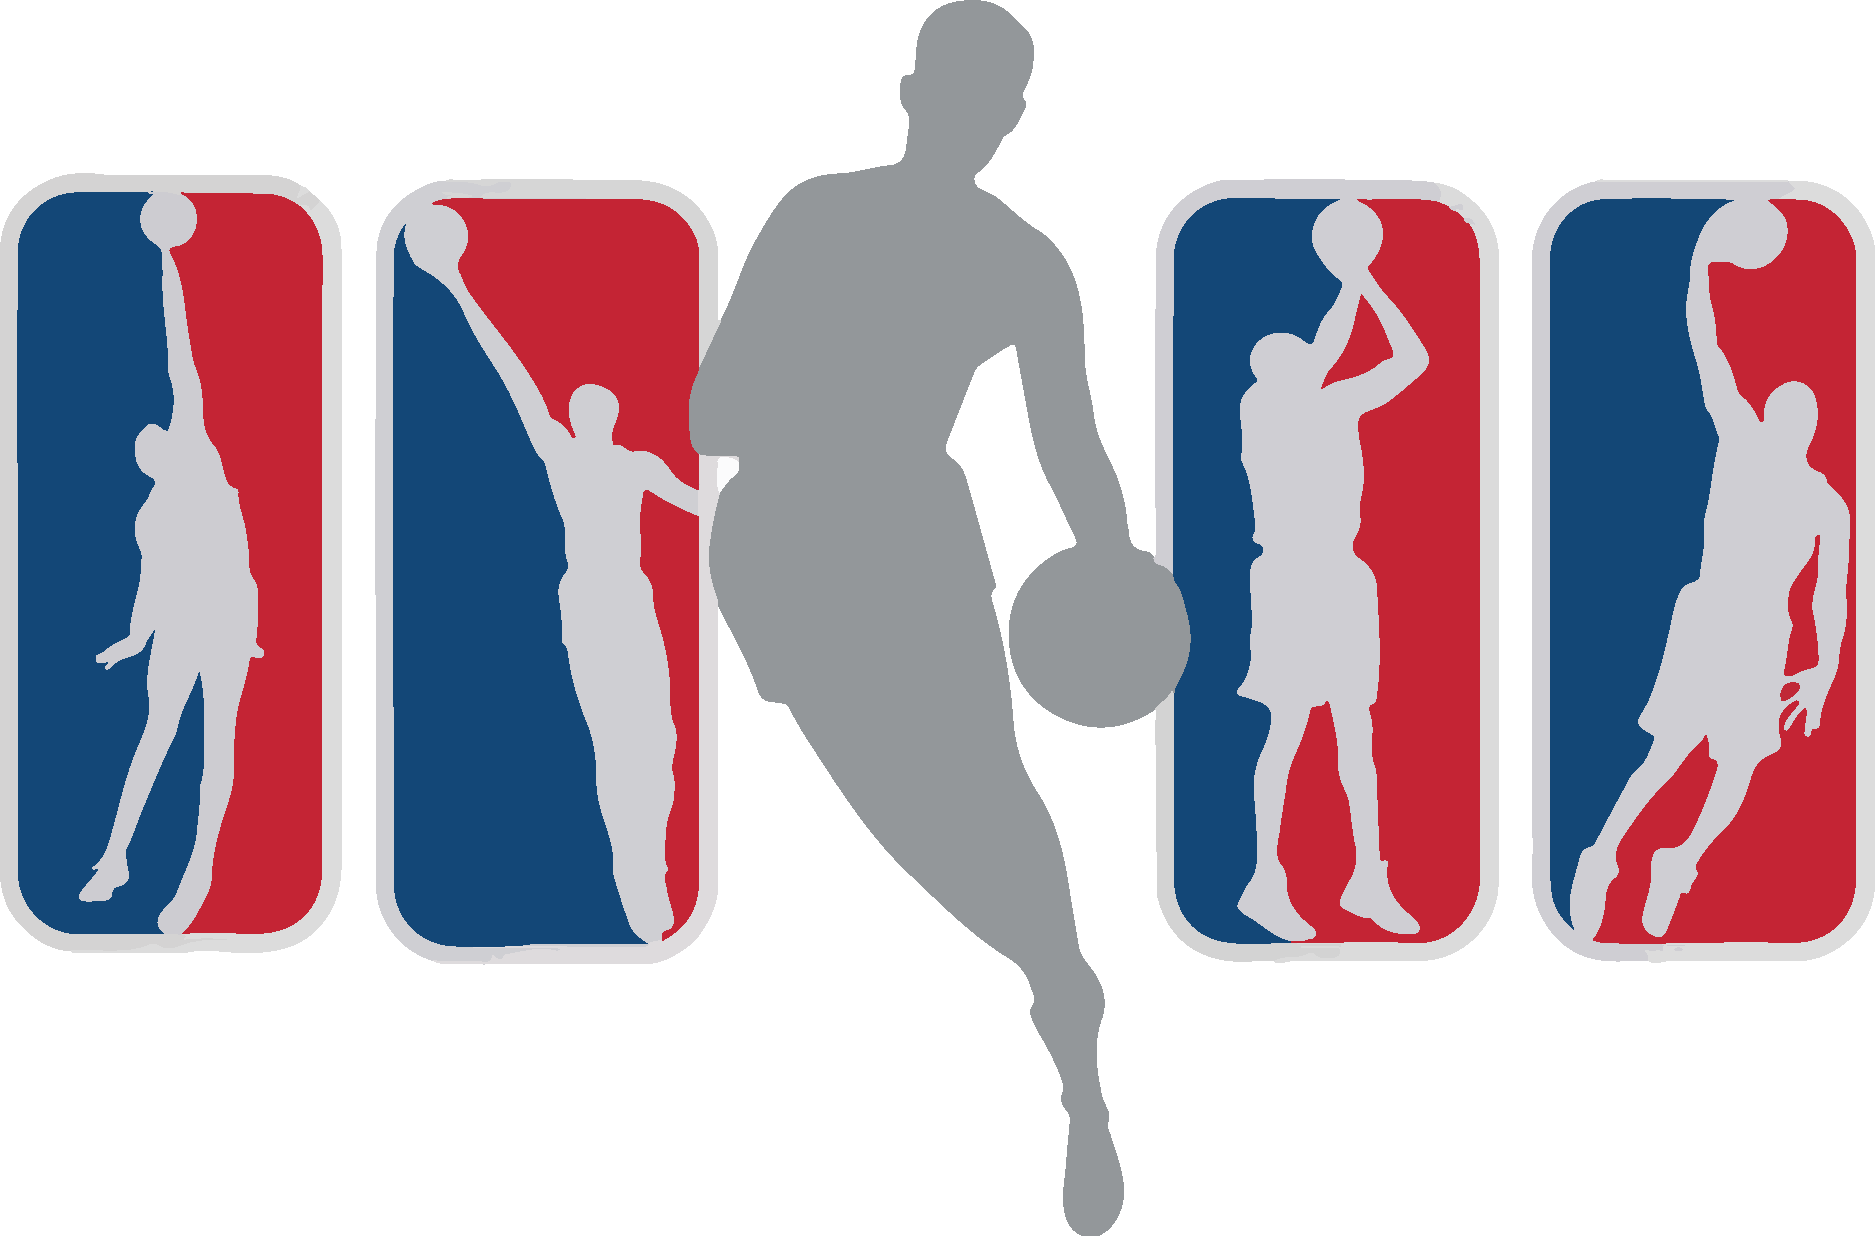 Nba Logo, allnba Team, indiana Pacers, Charlotte Hornets, orlando Magic,  Western Conference, detroit Pistons, Toronto Raptors, eastern Conference,  new York Knicks | Anyrgb